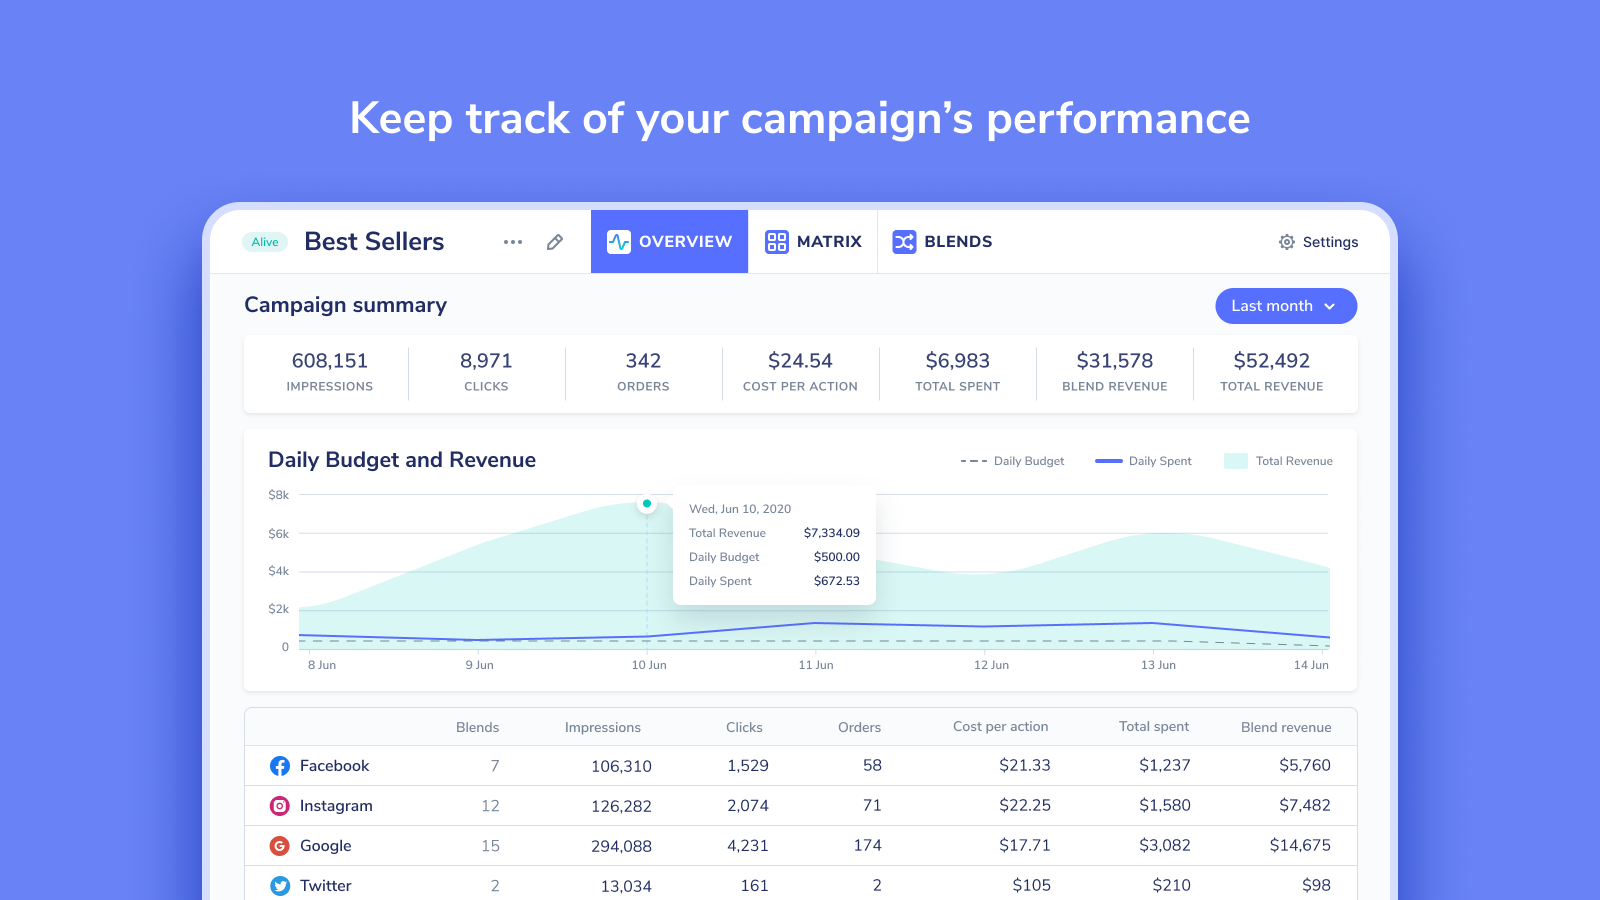 Keep track of your campaign’s performance